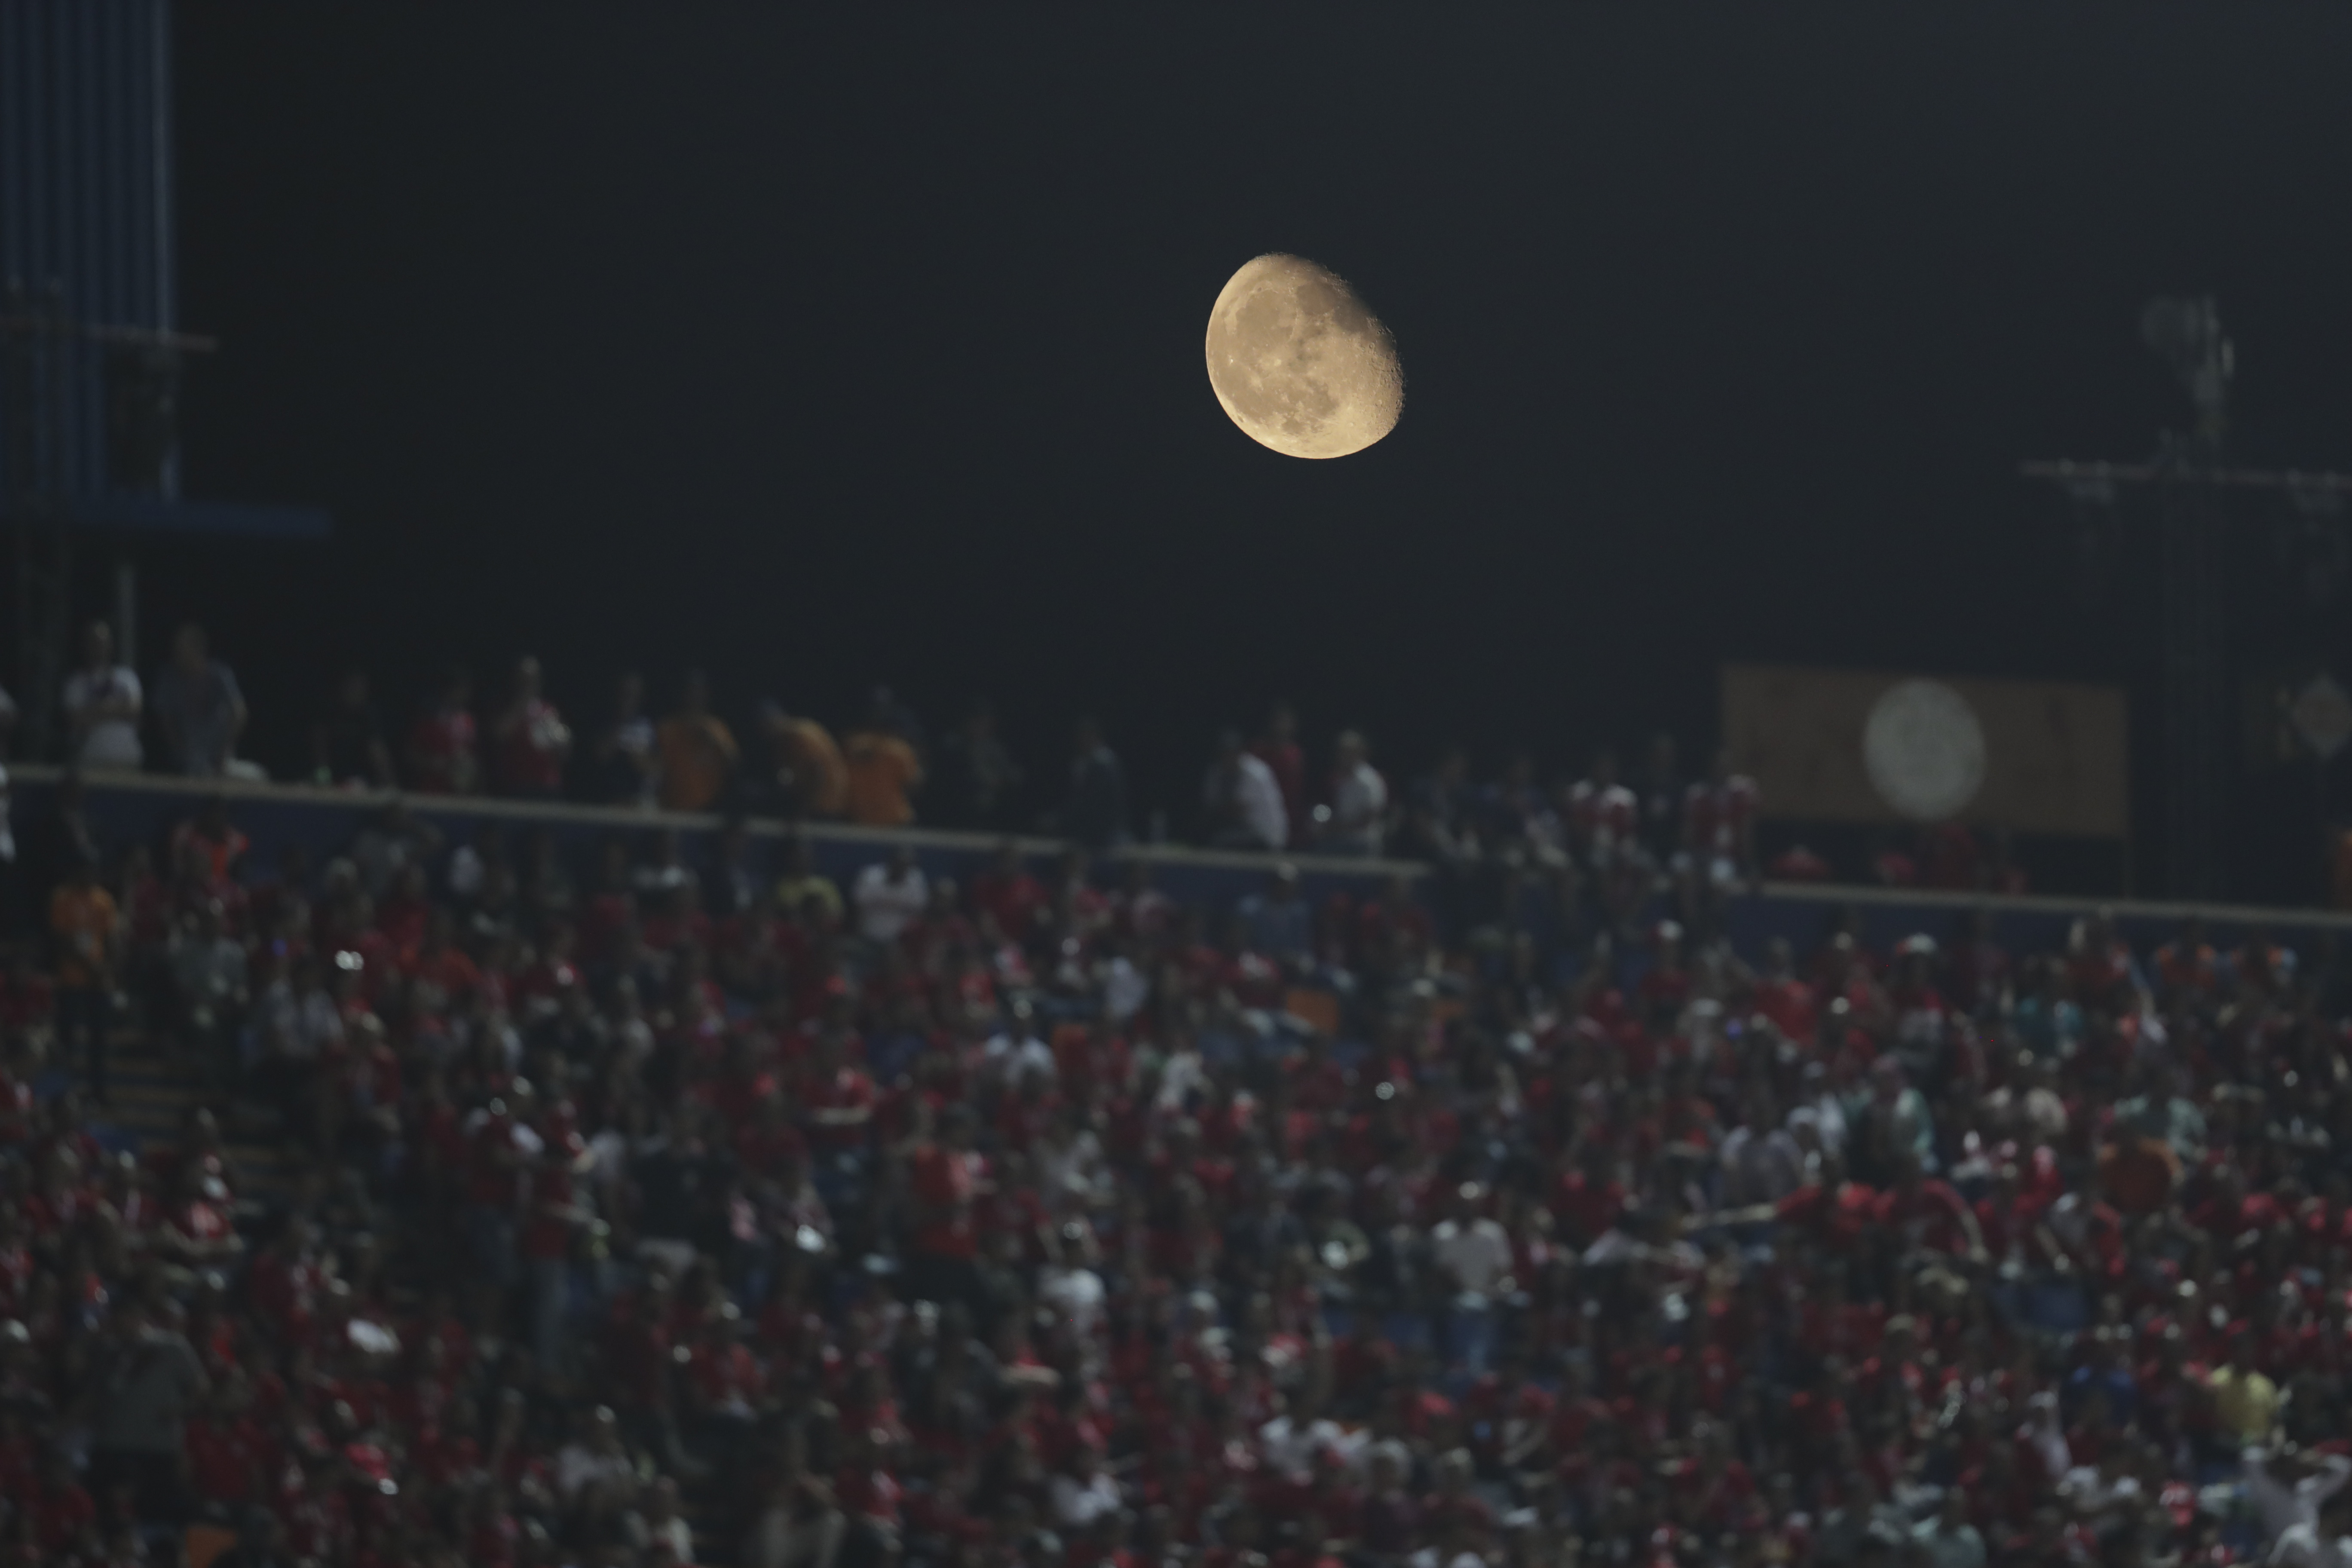 Moon rises above the stadium during the group A soccer match between Egypt and Zimbabwe at the Africa Cup of Nations at Cairo International Stadium in Cairo, Egypt, Friday, June 21, 2019. (AP Photo/Hassan Ammar)